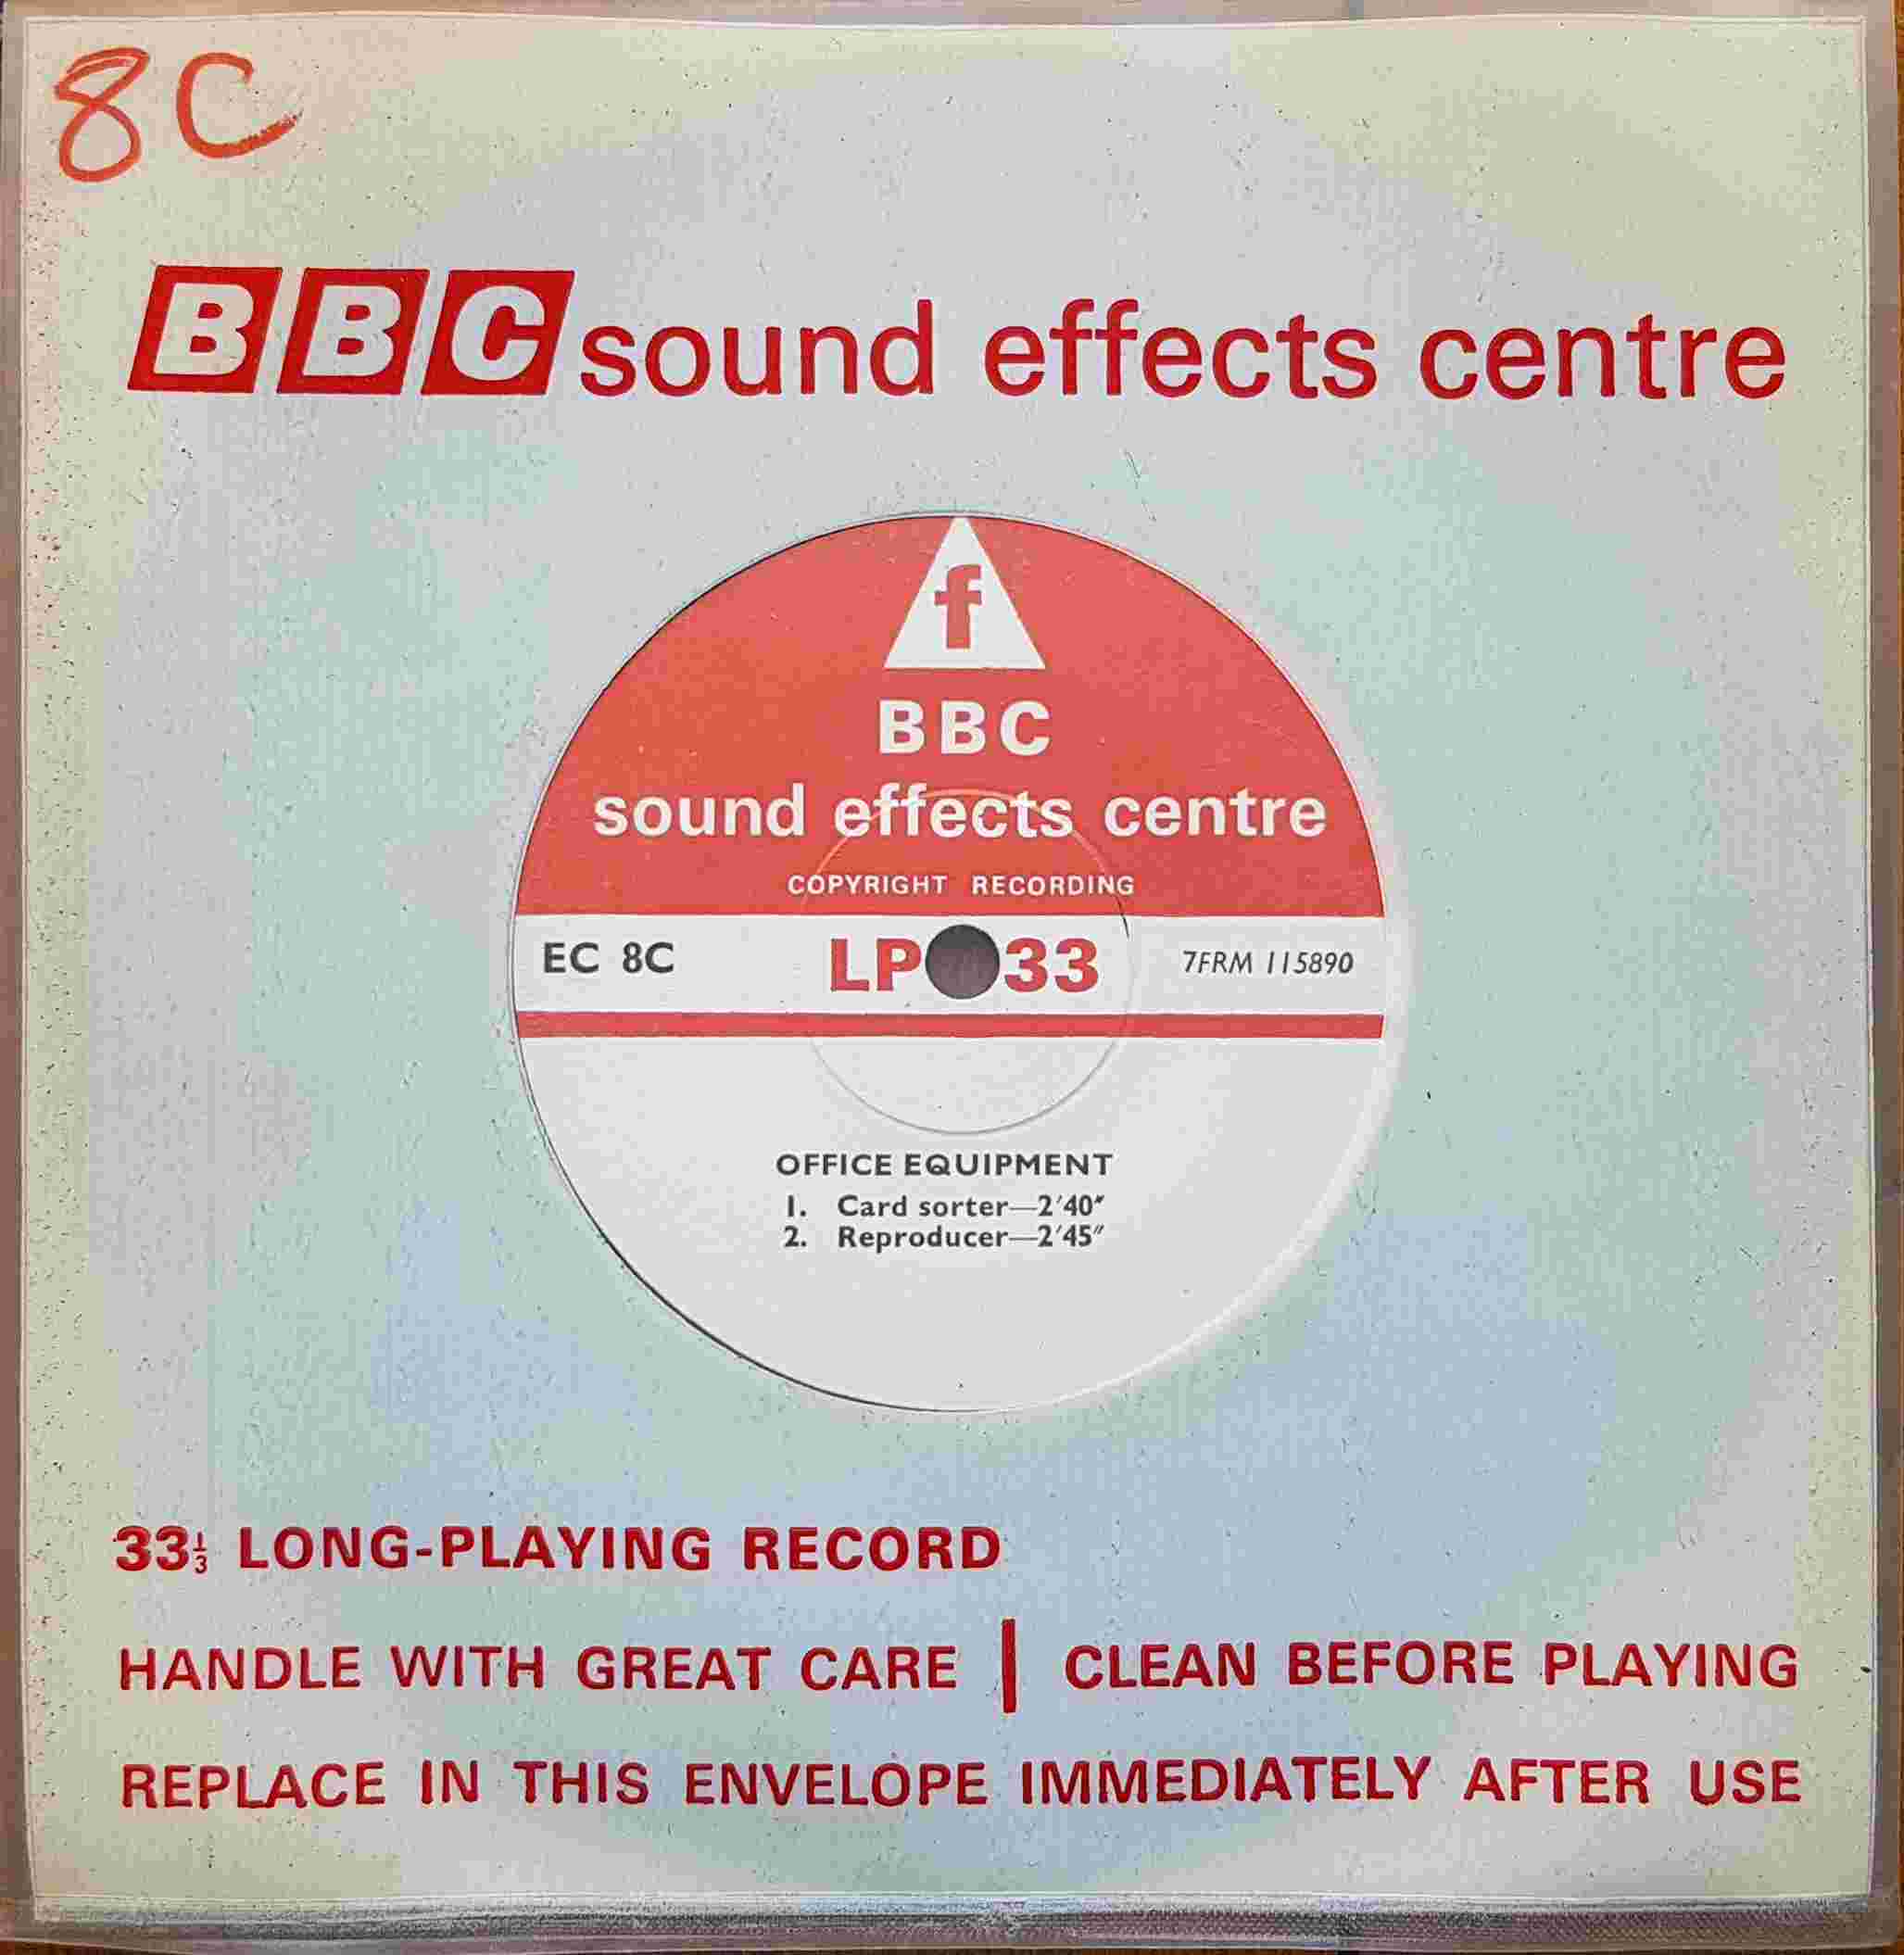 Picture of EC 8C Office equipment by artist Not registered from the BBC singles - Records and Tapes library